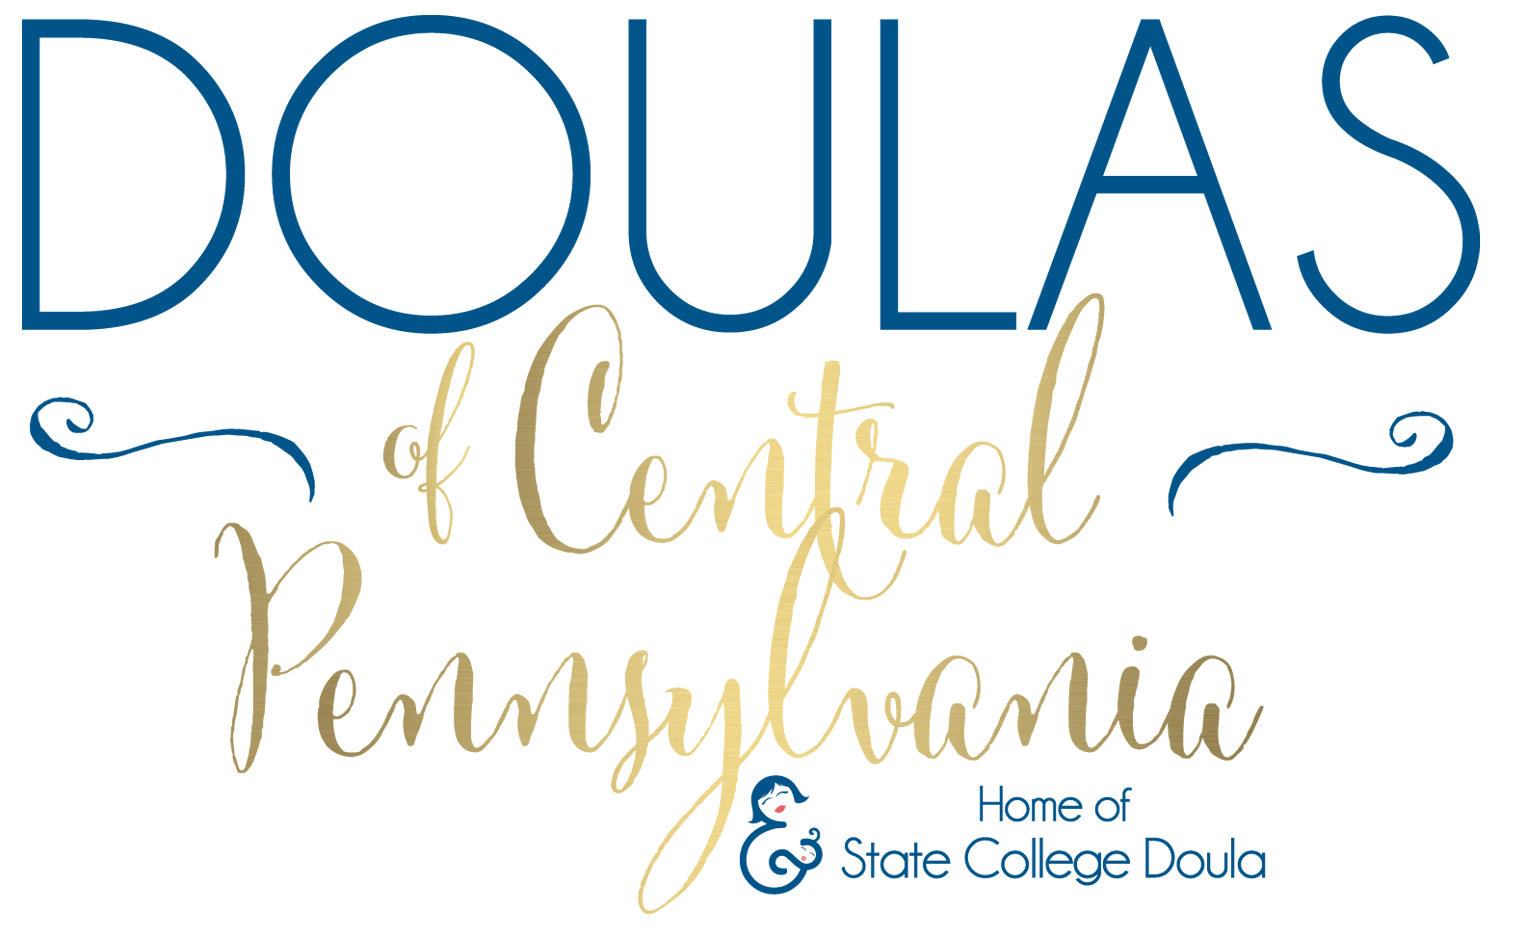 Doulas of Central Pennsylvania home of State College Doula